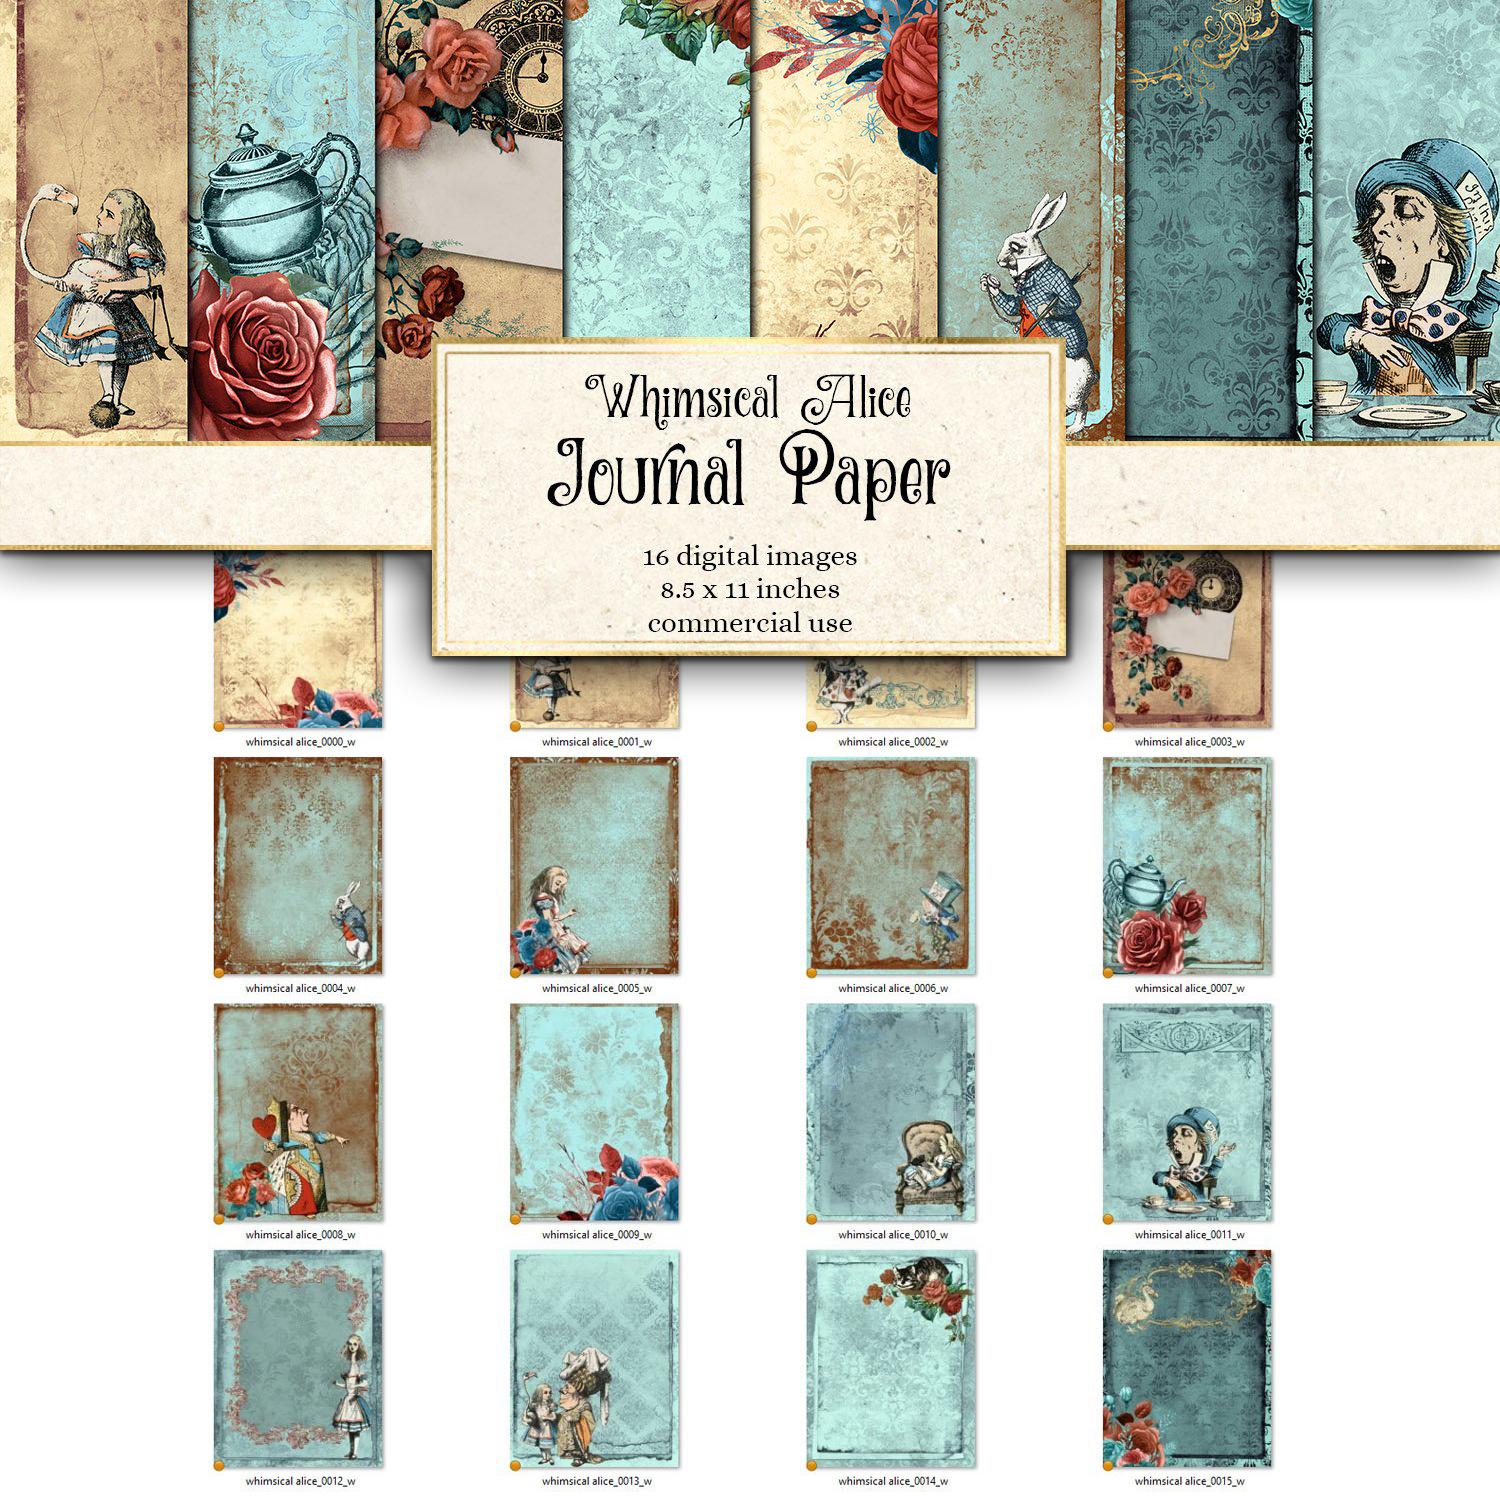 Whimsical alice in wonderland journal paper preview.